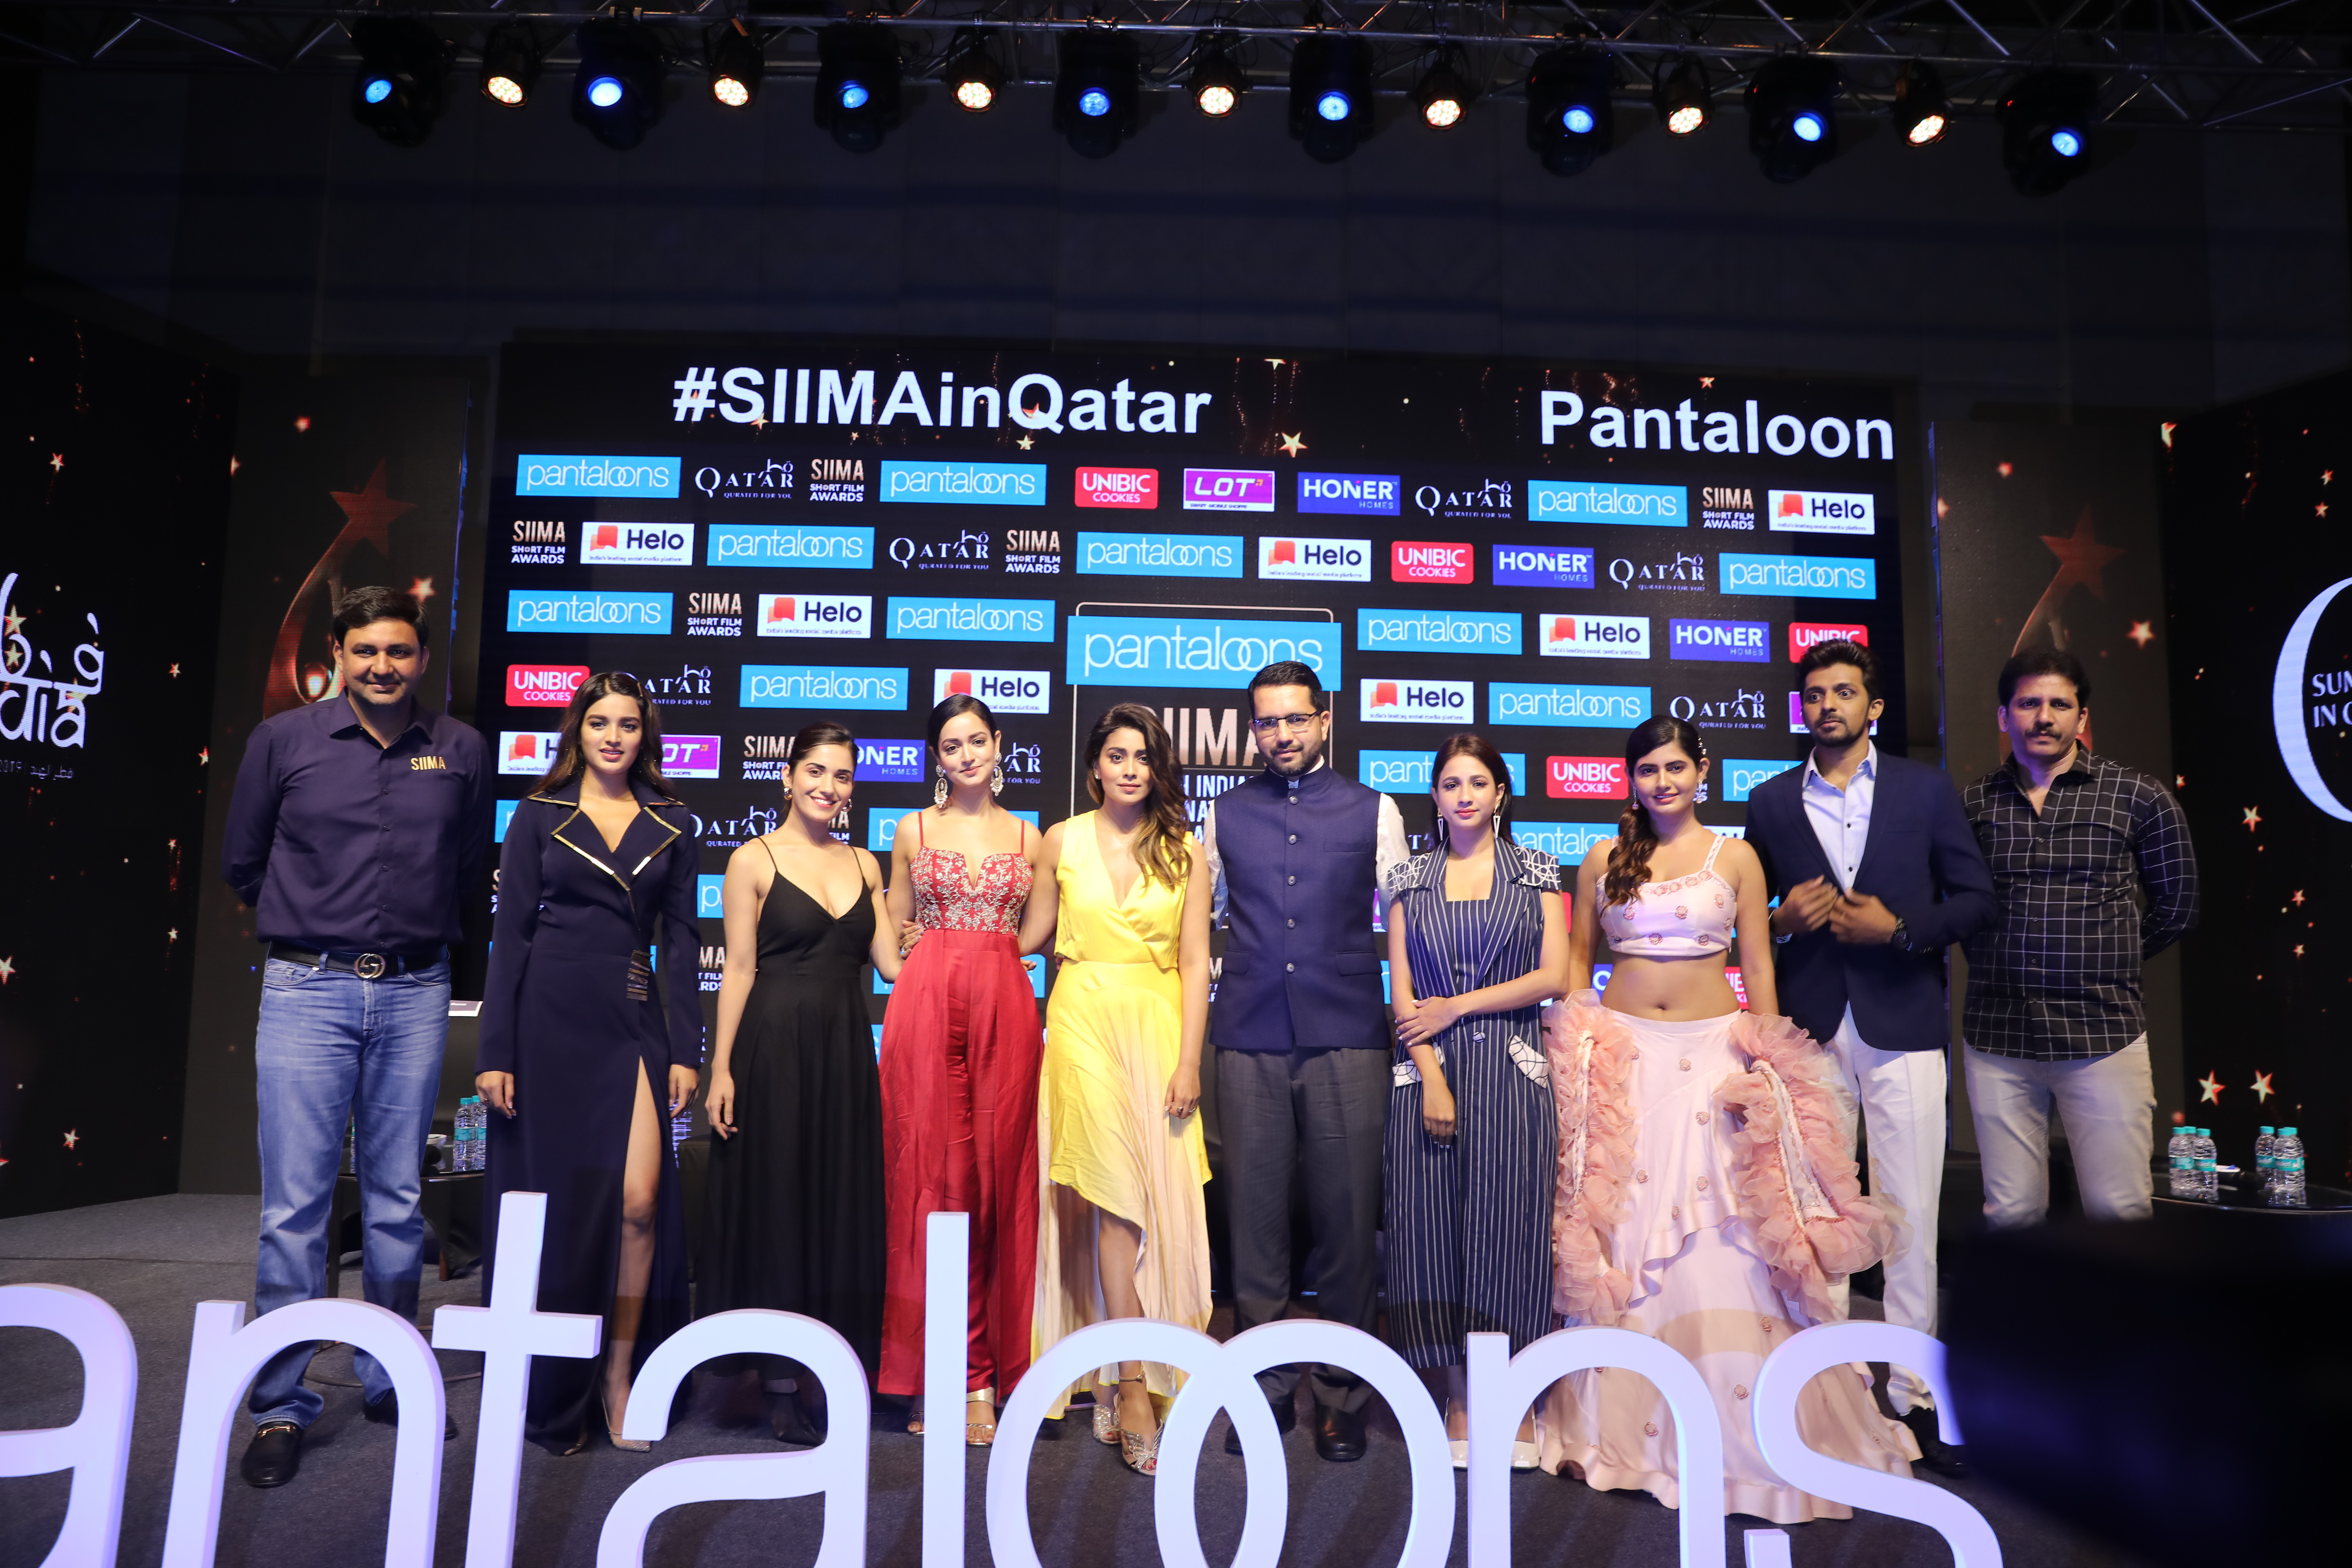 “Pantaloons SIIMA” to host its 8th Edition in Qatar on 15th-16th August.